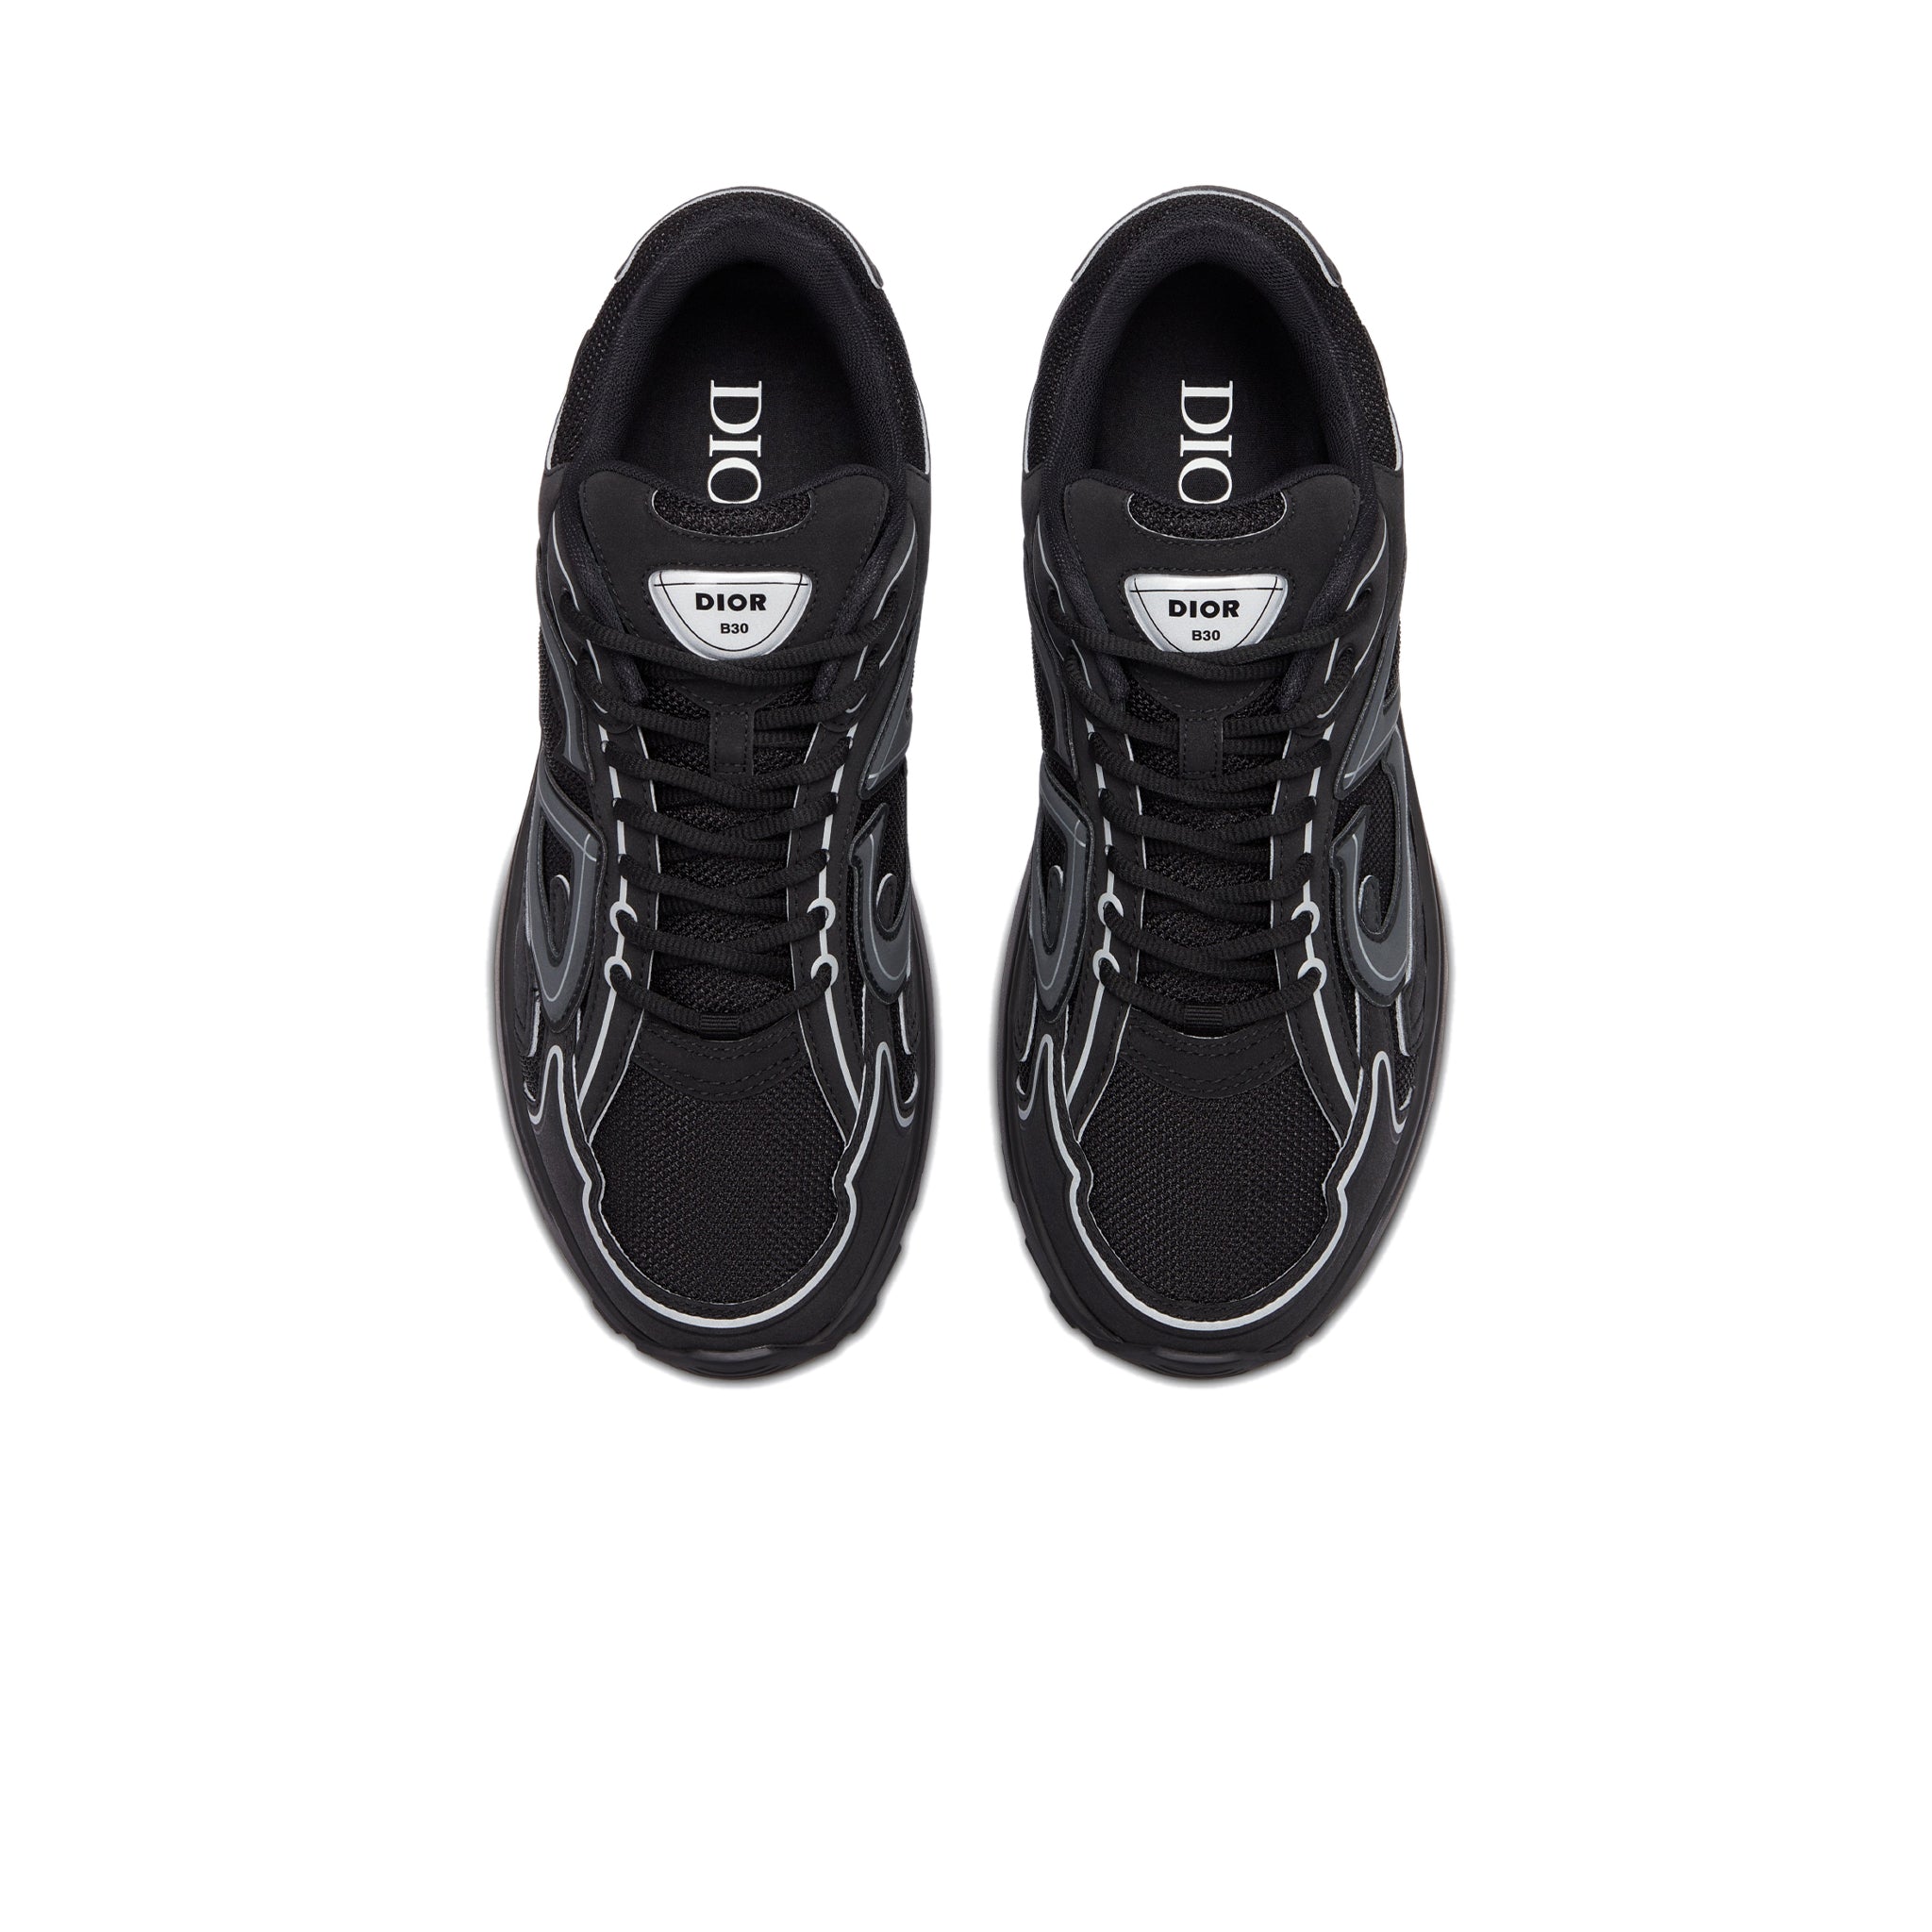 Image of Dior B30 Technical Mesh Black Trainer